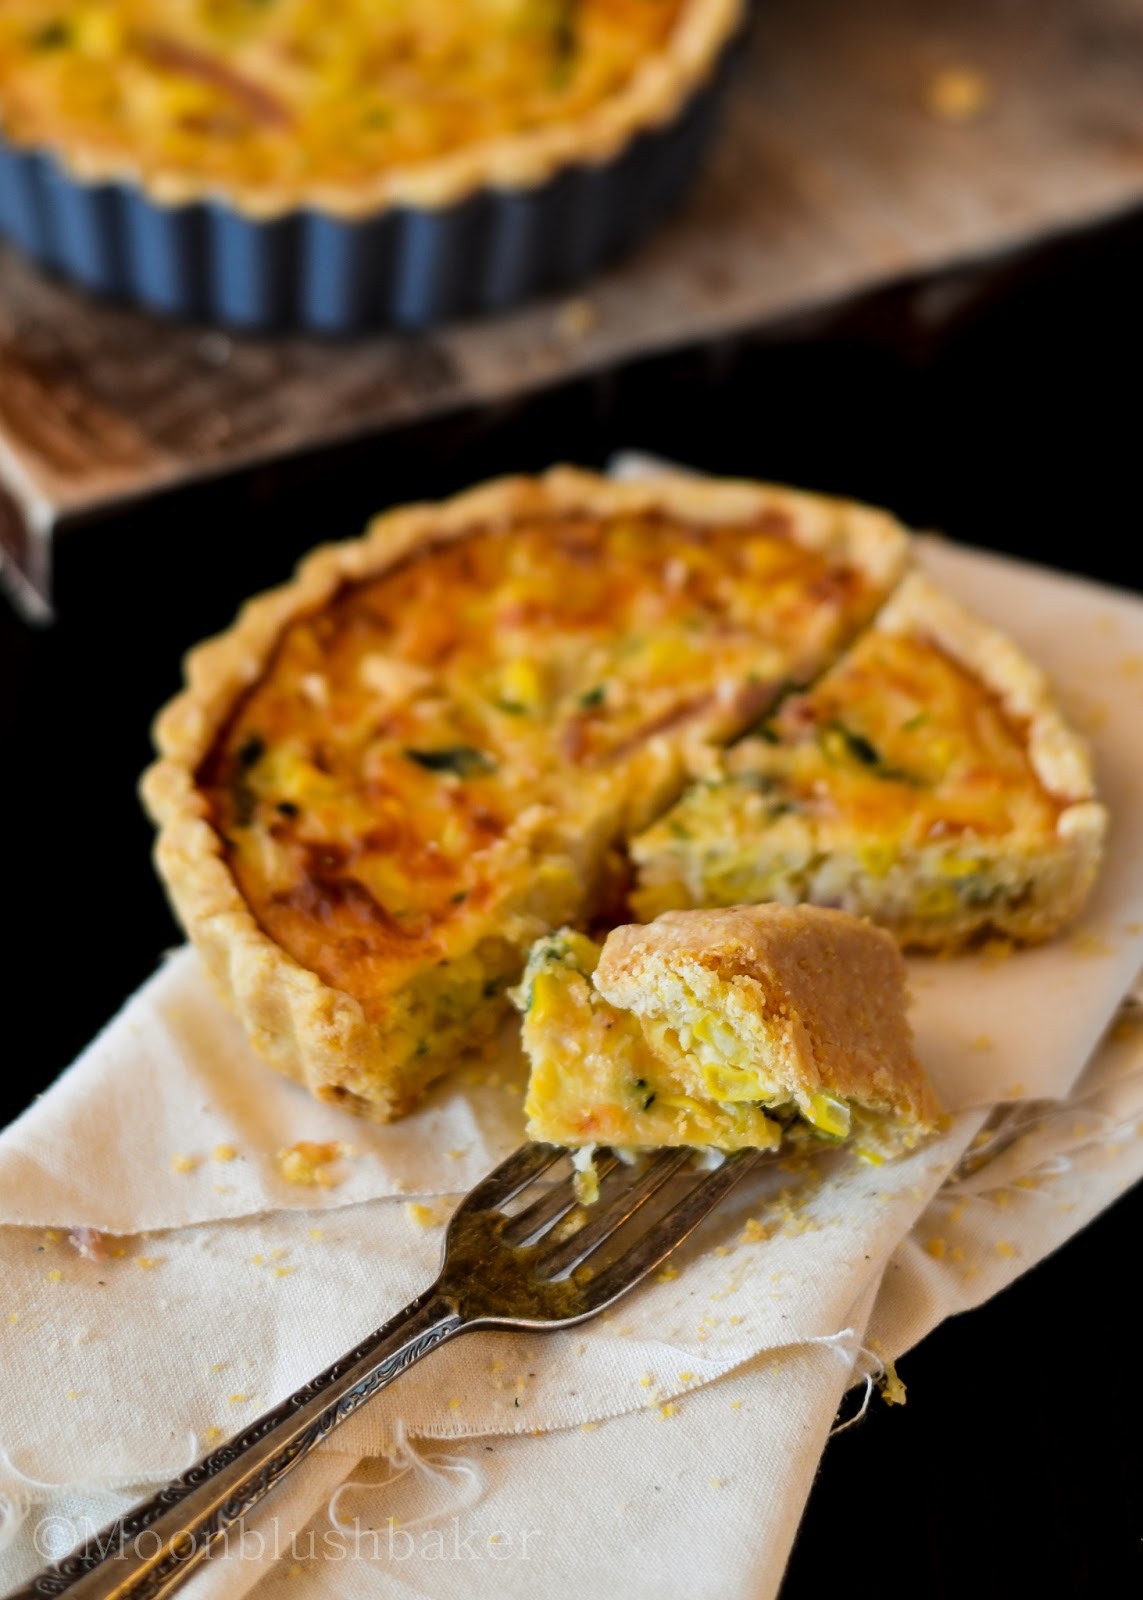 The science of Yum /-/ Eggless double corn Quiche | The moonblush Baker